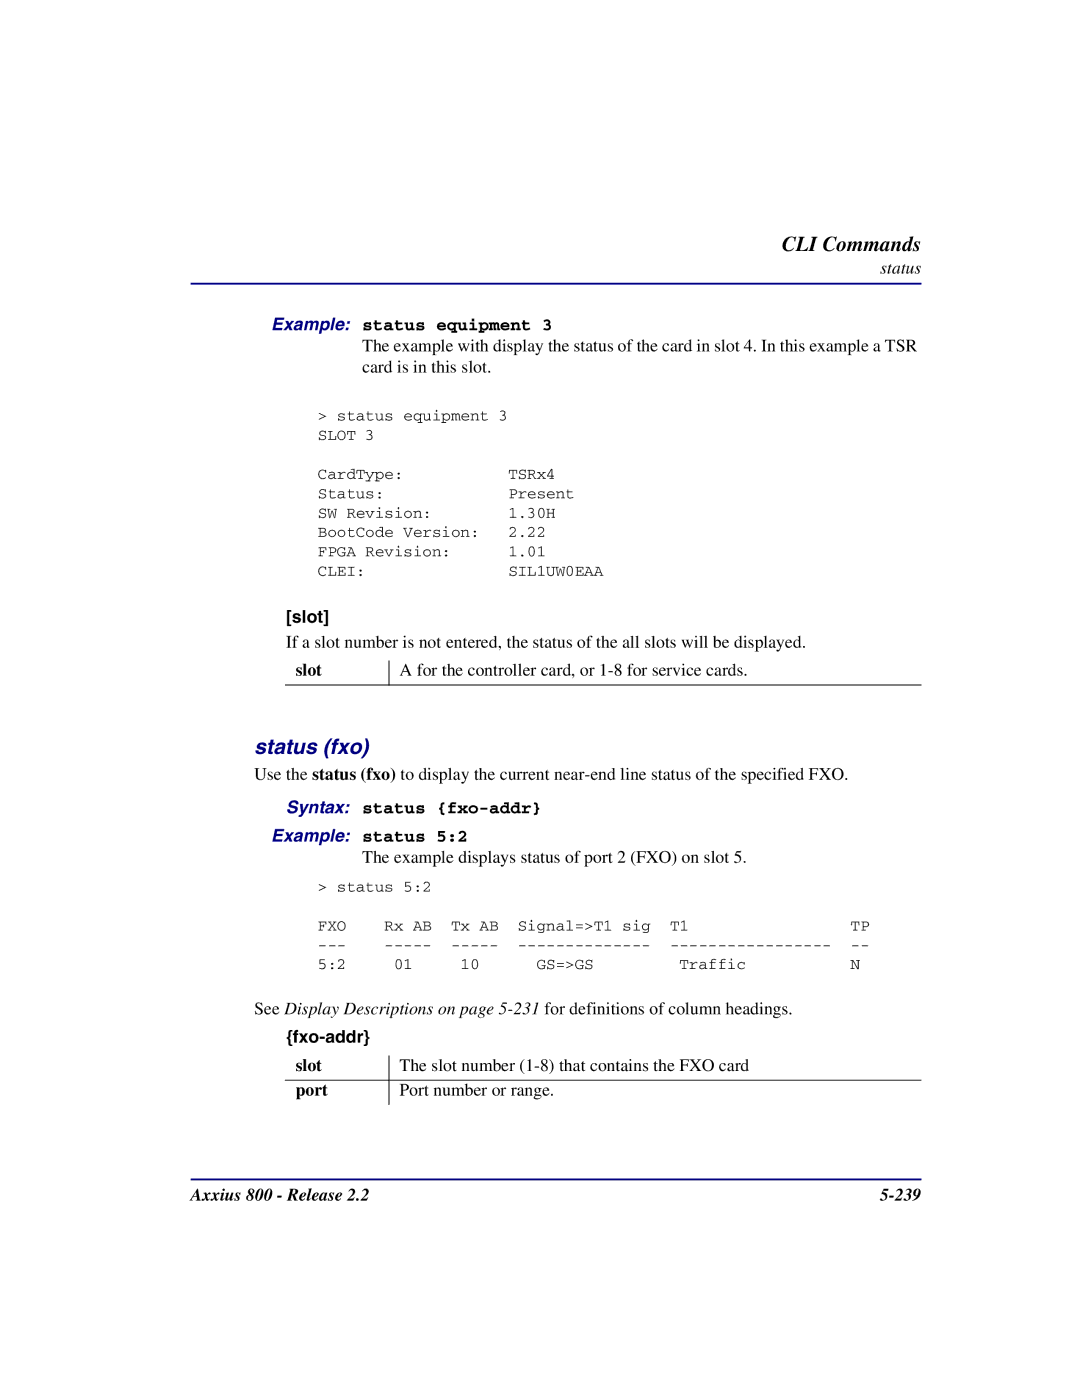 Carrier Access Axxius 800 user manual Status fxo, Slot, Syntax status fxo-addr Example status 